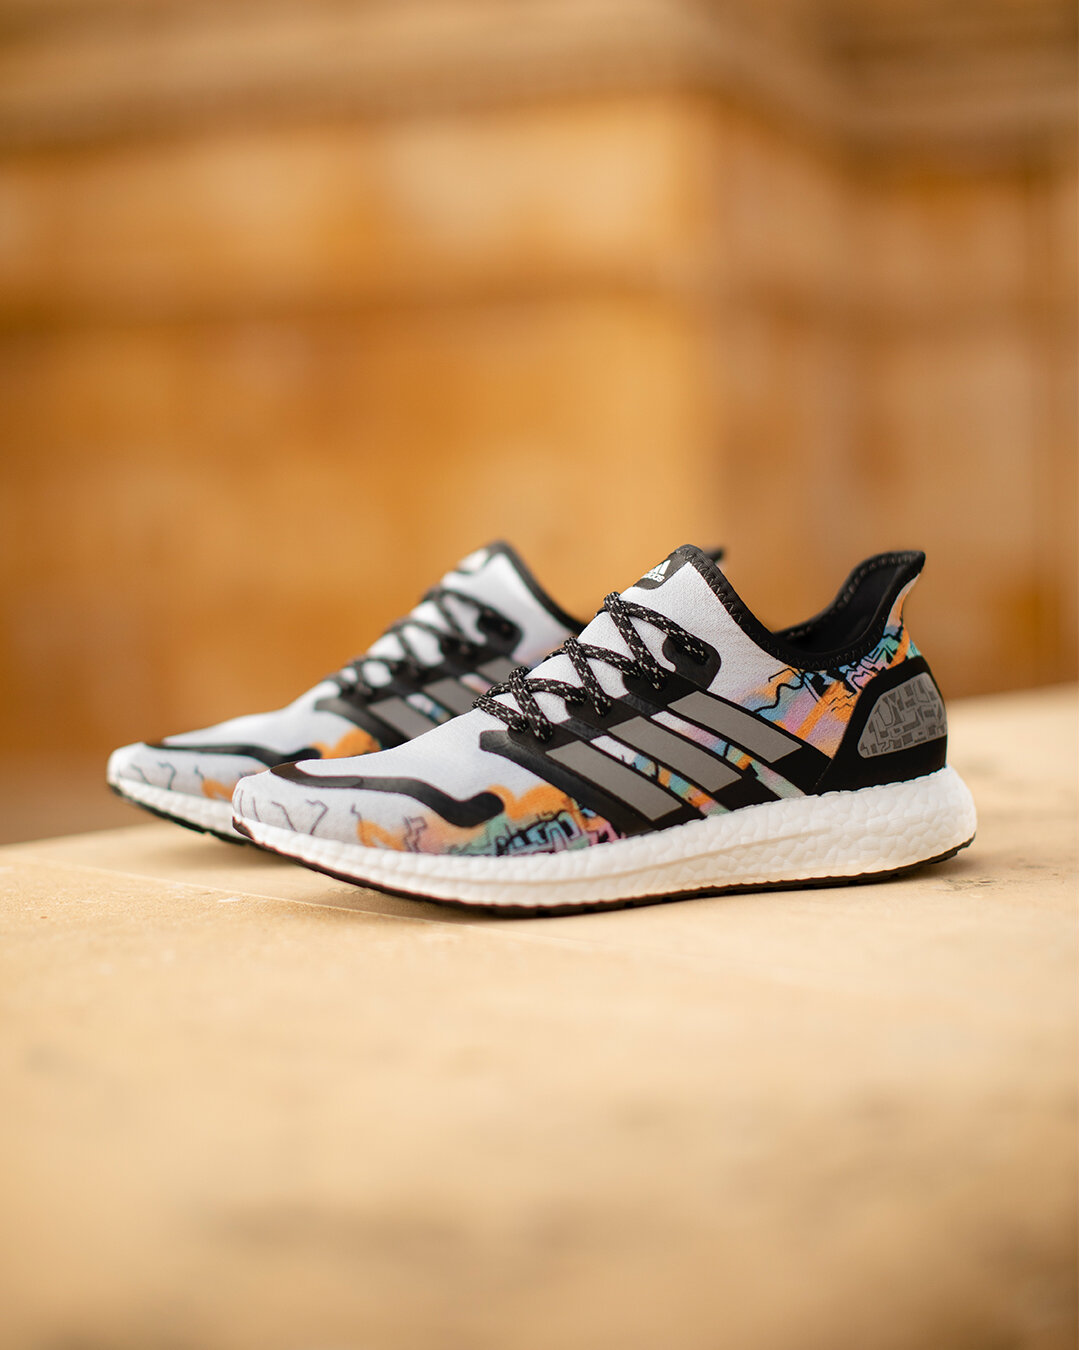 Adidas Speed Factory AM4 Campaign 